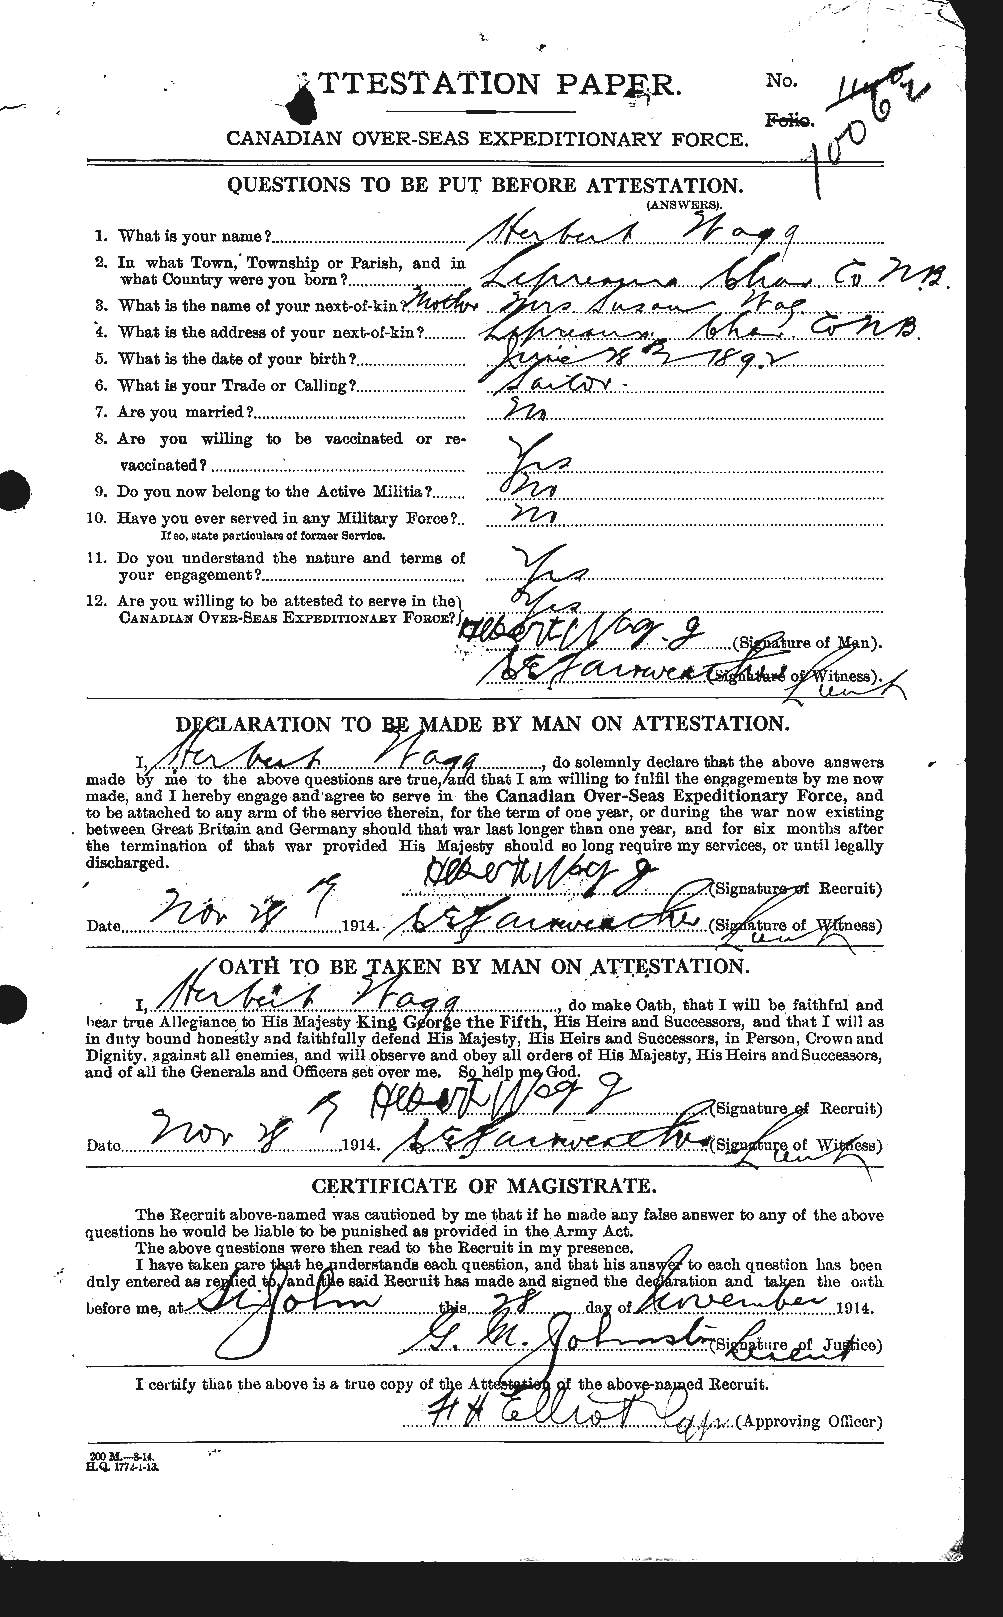 Personnel Records of the First World War - CEF 651476a